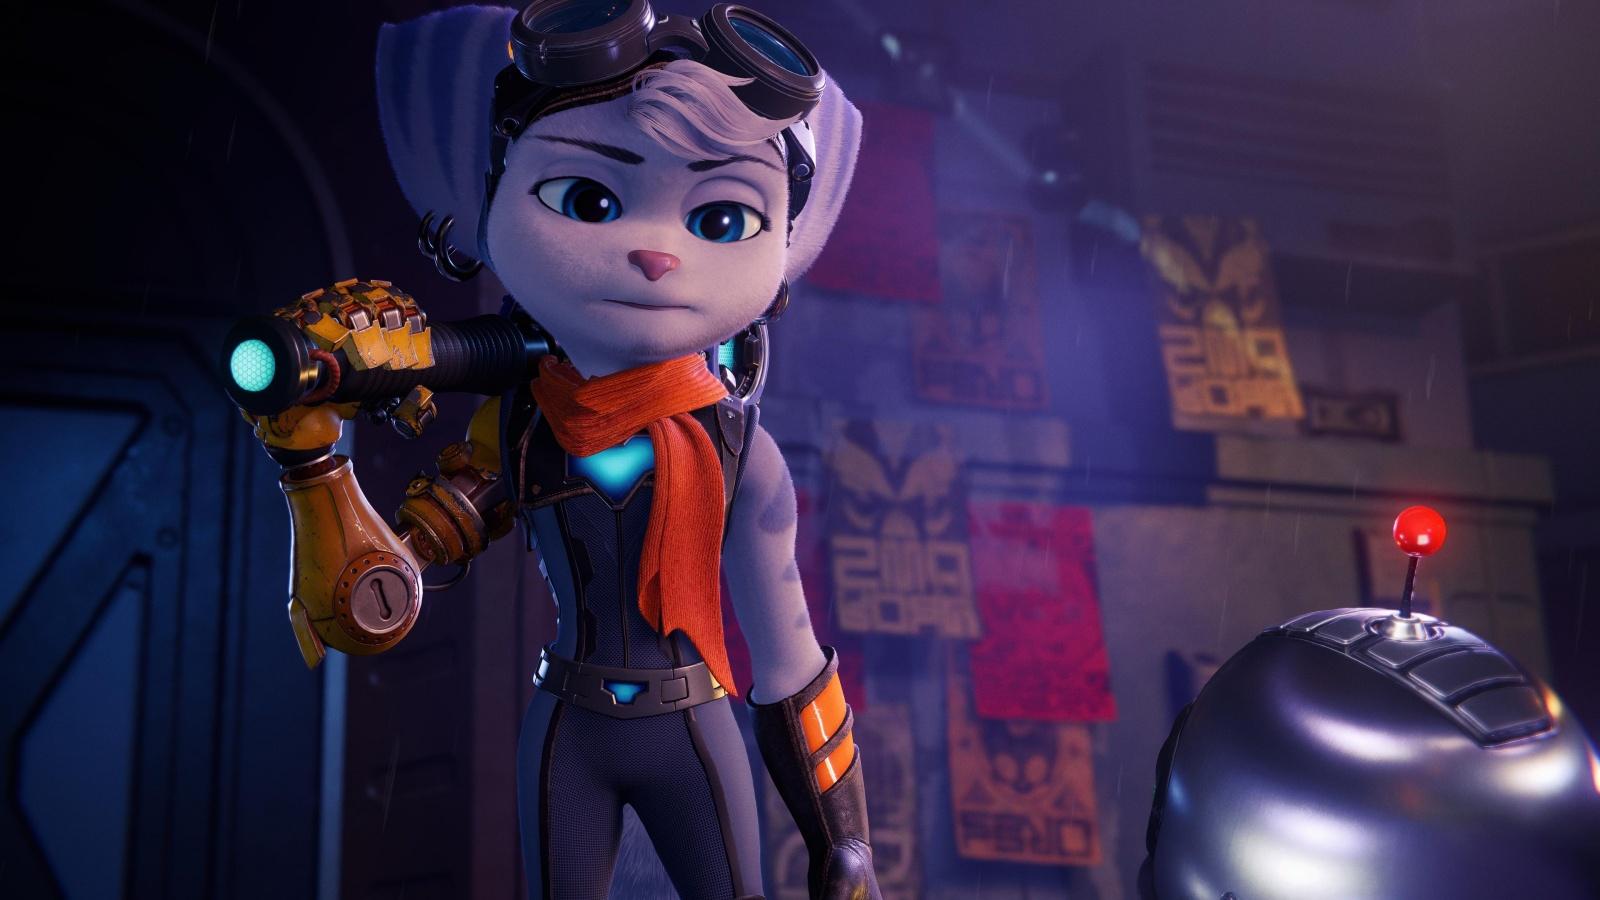 Ratchet & Clank coming to PS4 - and a cinema near you - next year